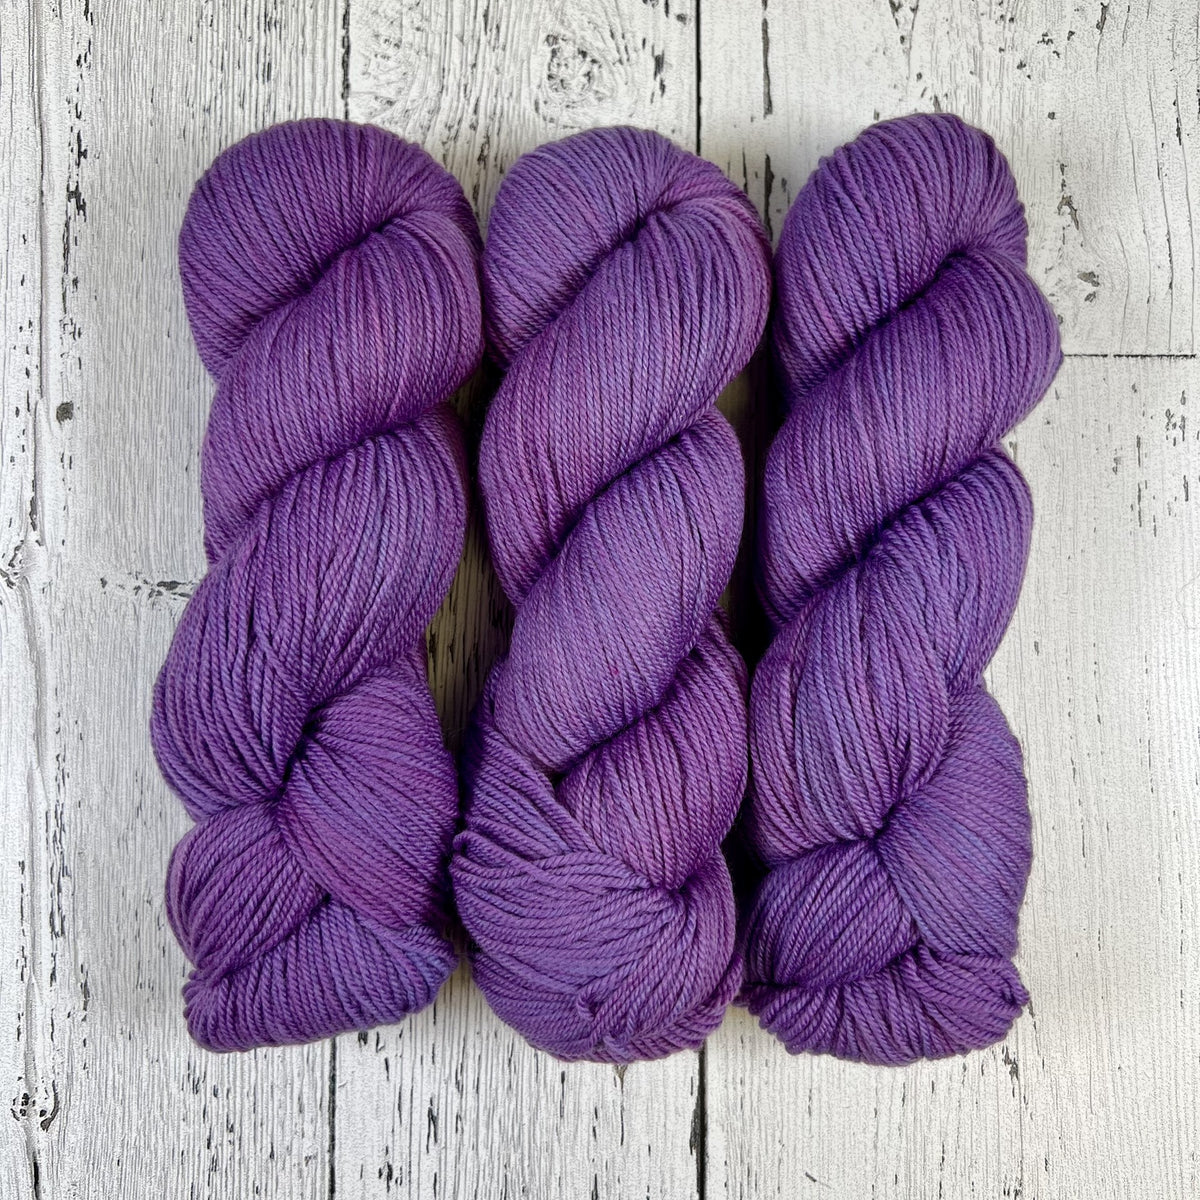 African Violet - Merino DK / Light Worsted - Dyed Stock